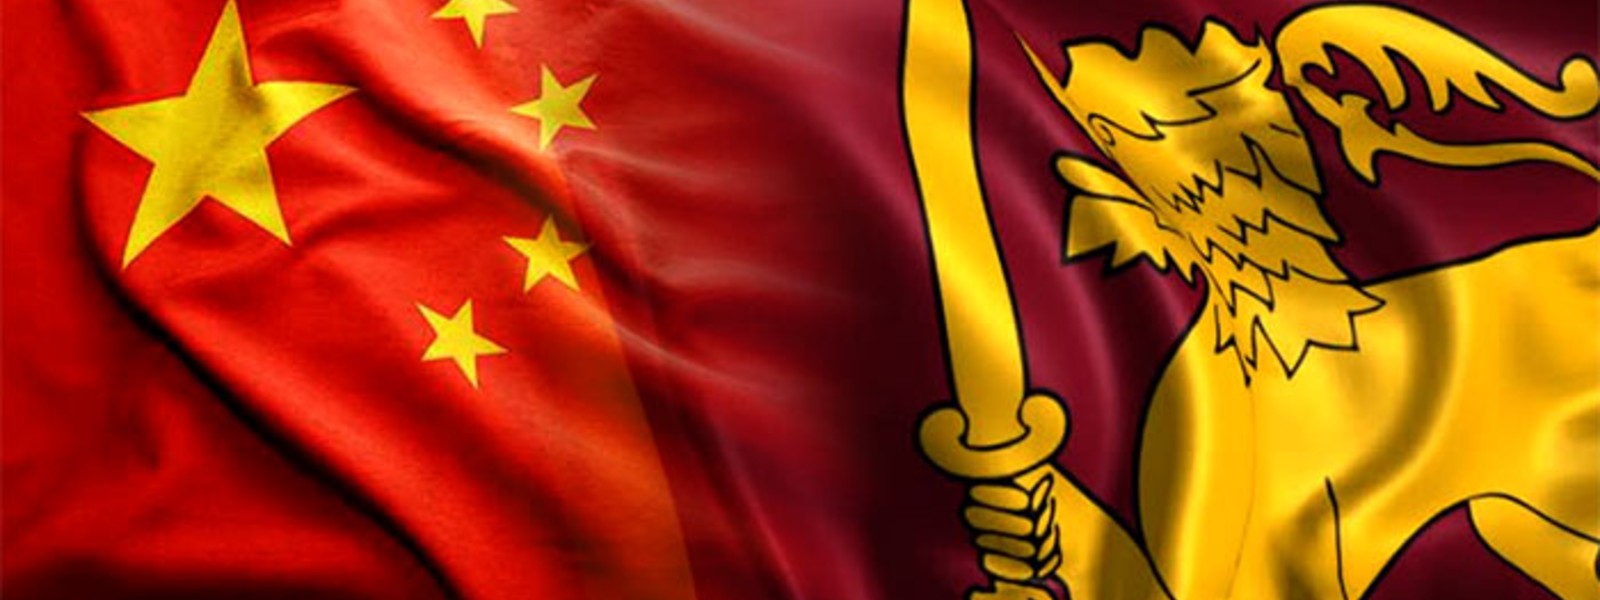 Sri Lanka asks China for help with trade